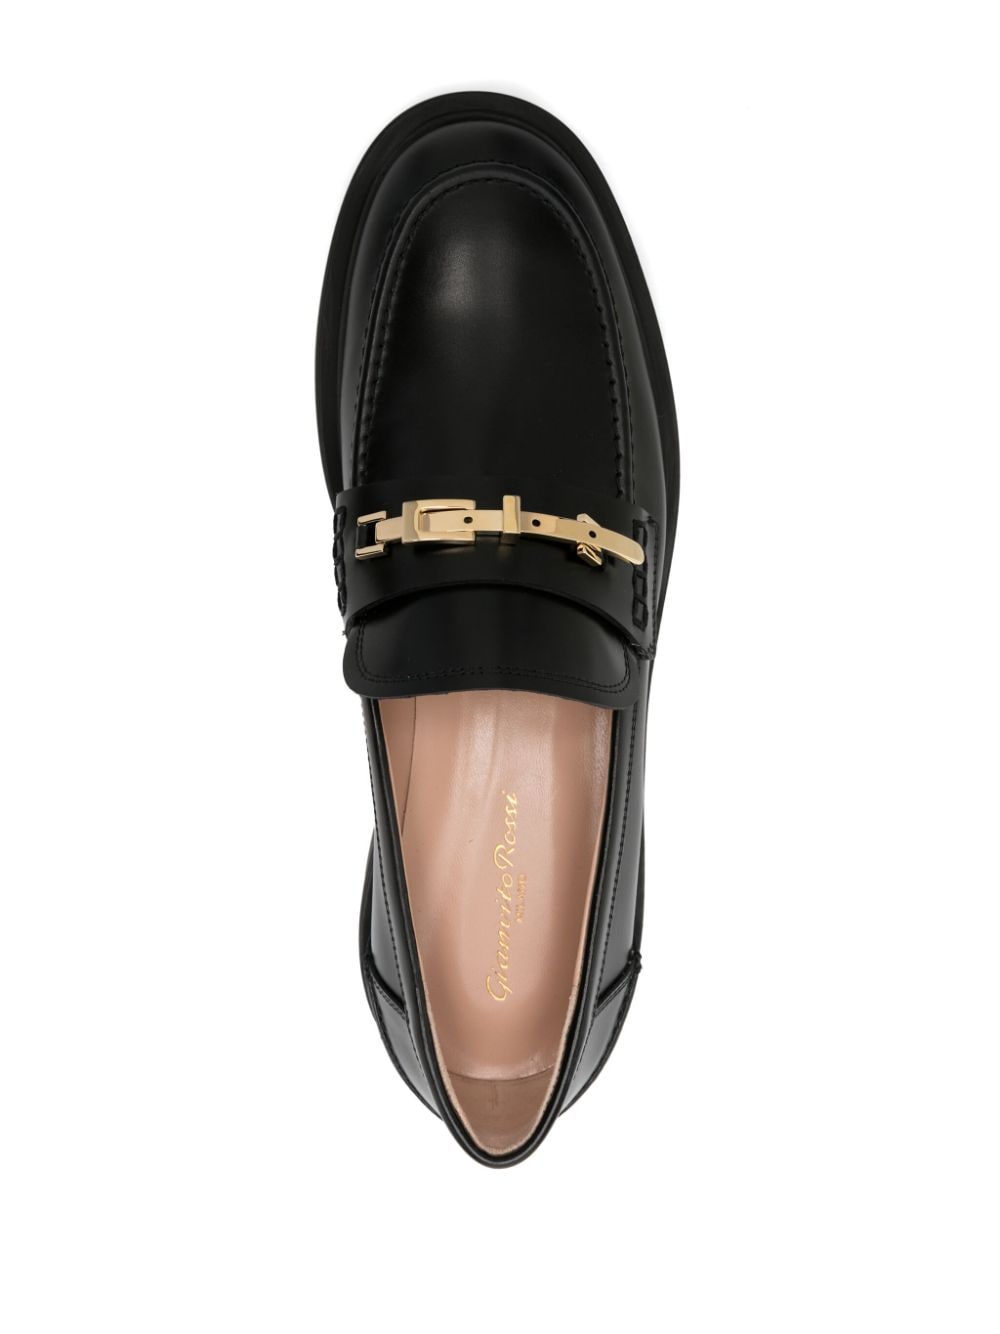 Shop Gianvito Rossi Luxurious Black Leather Loafers